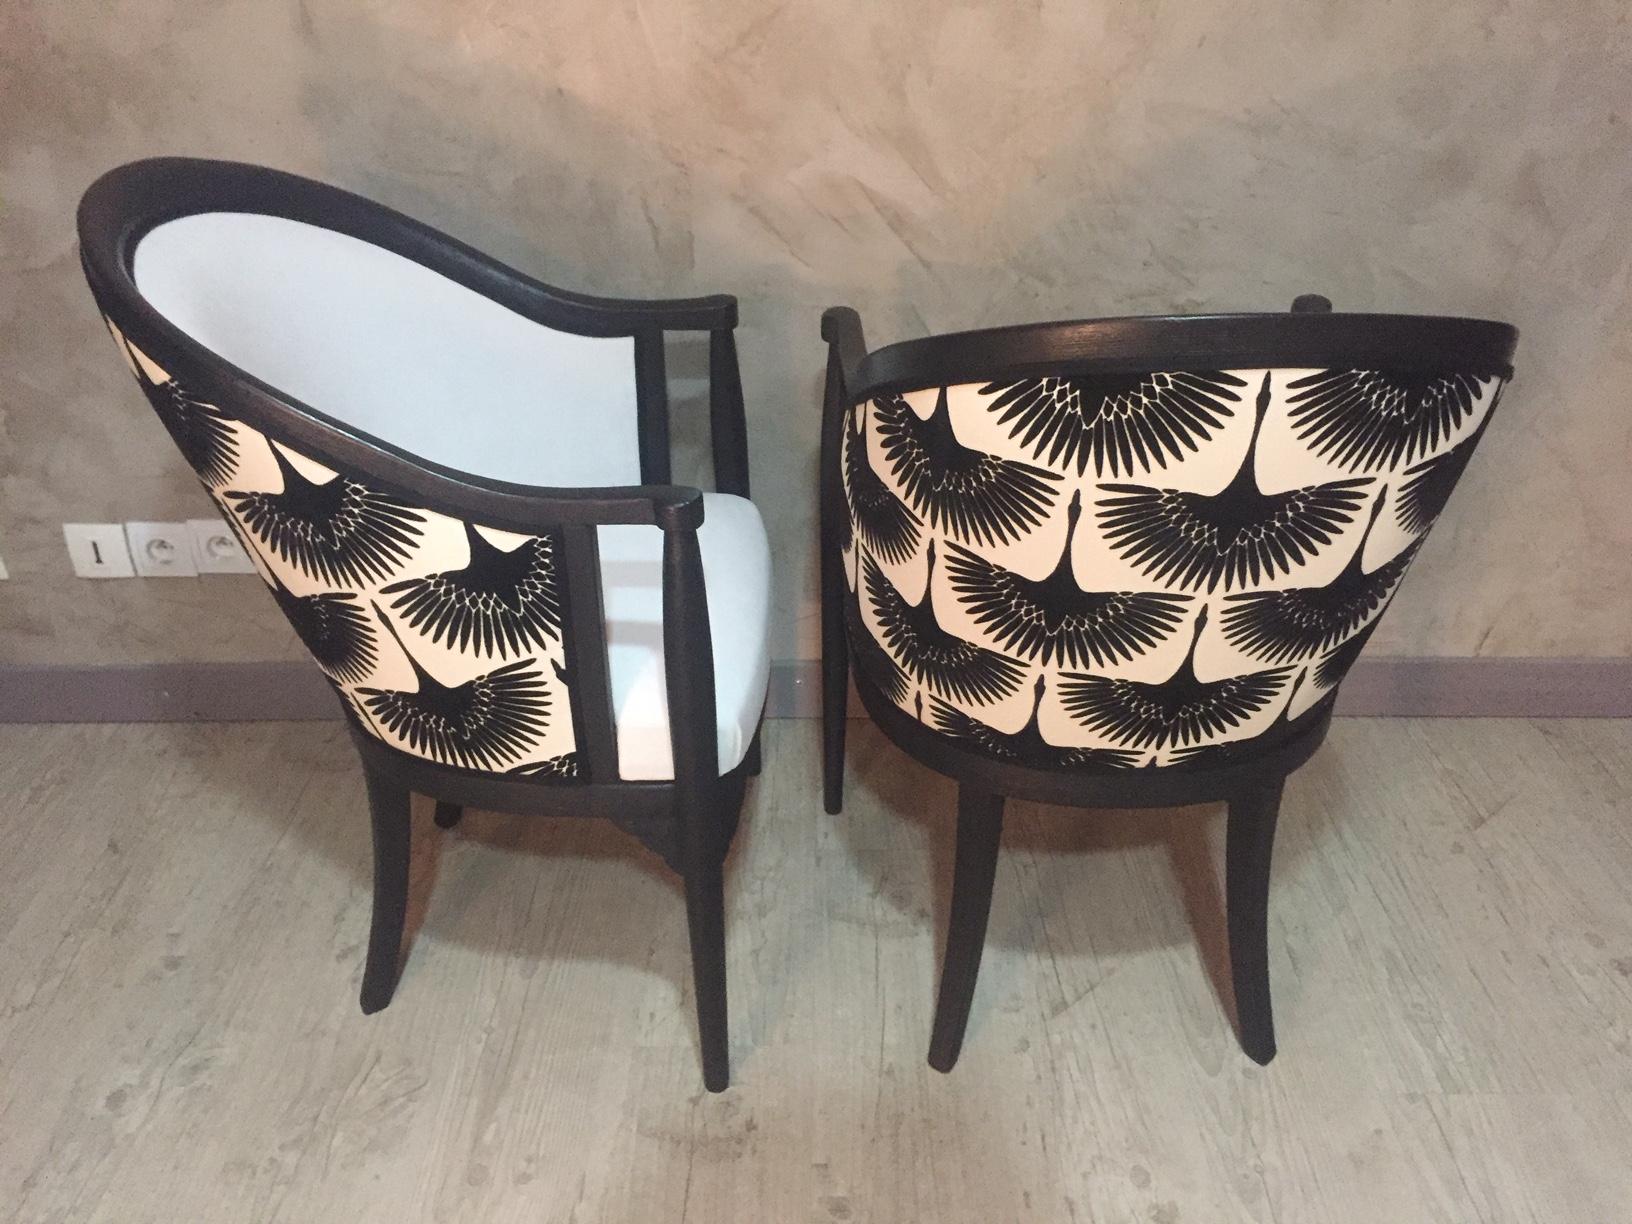 Fabric 20th Century French Art Deco Upholstered Armchair Pair, 1930s